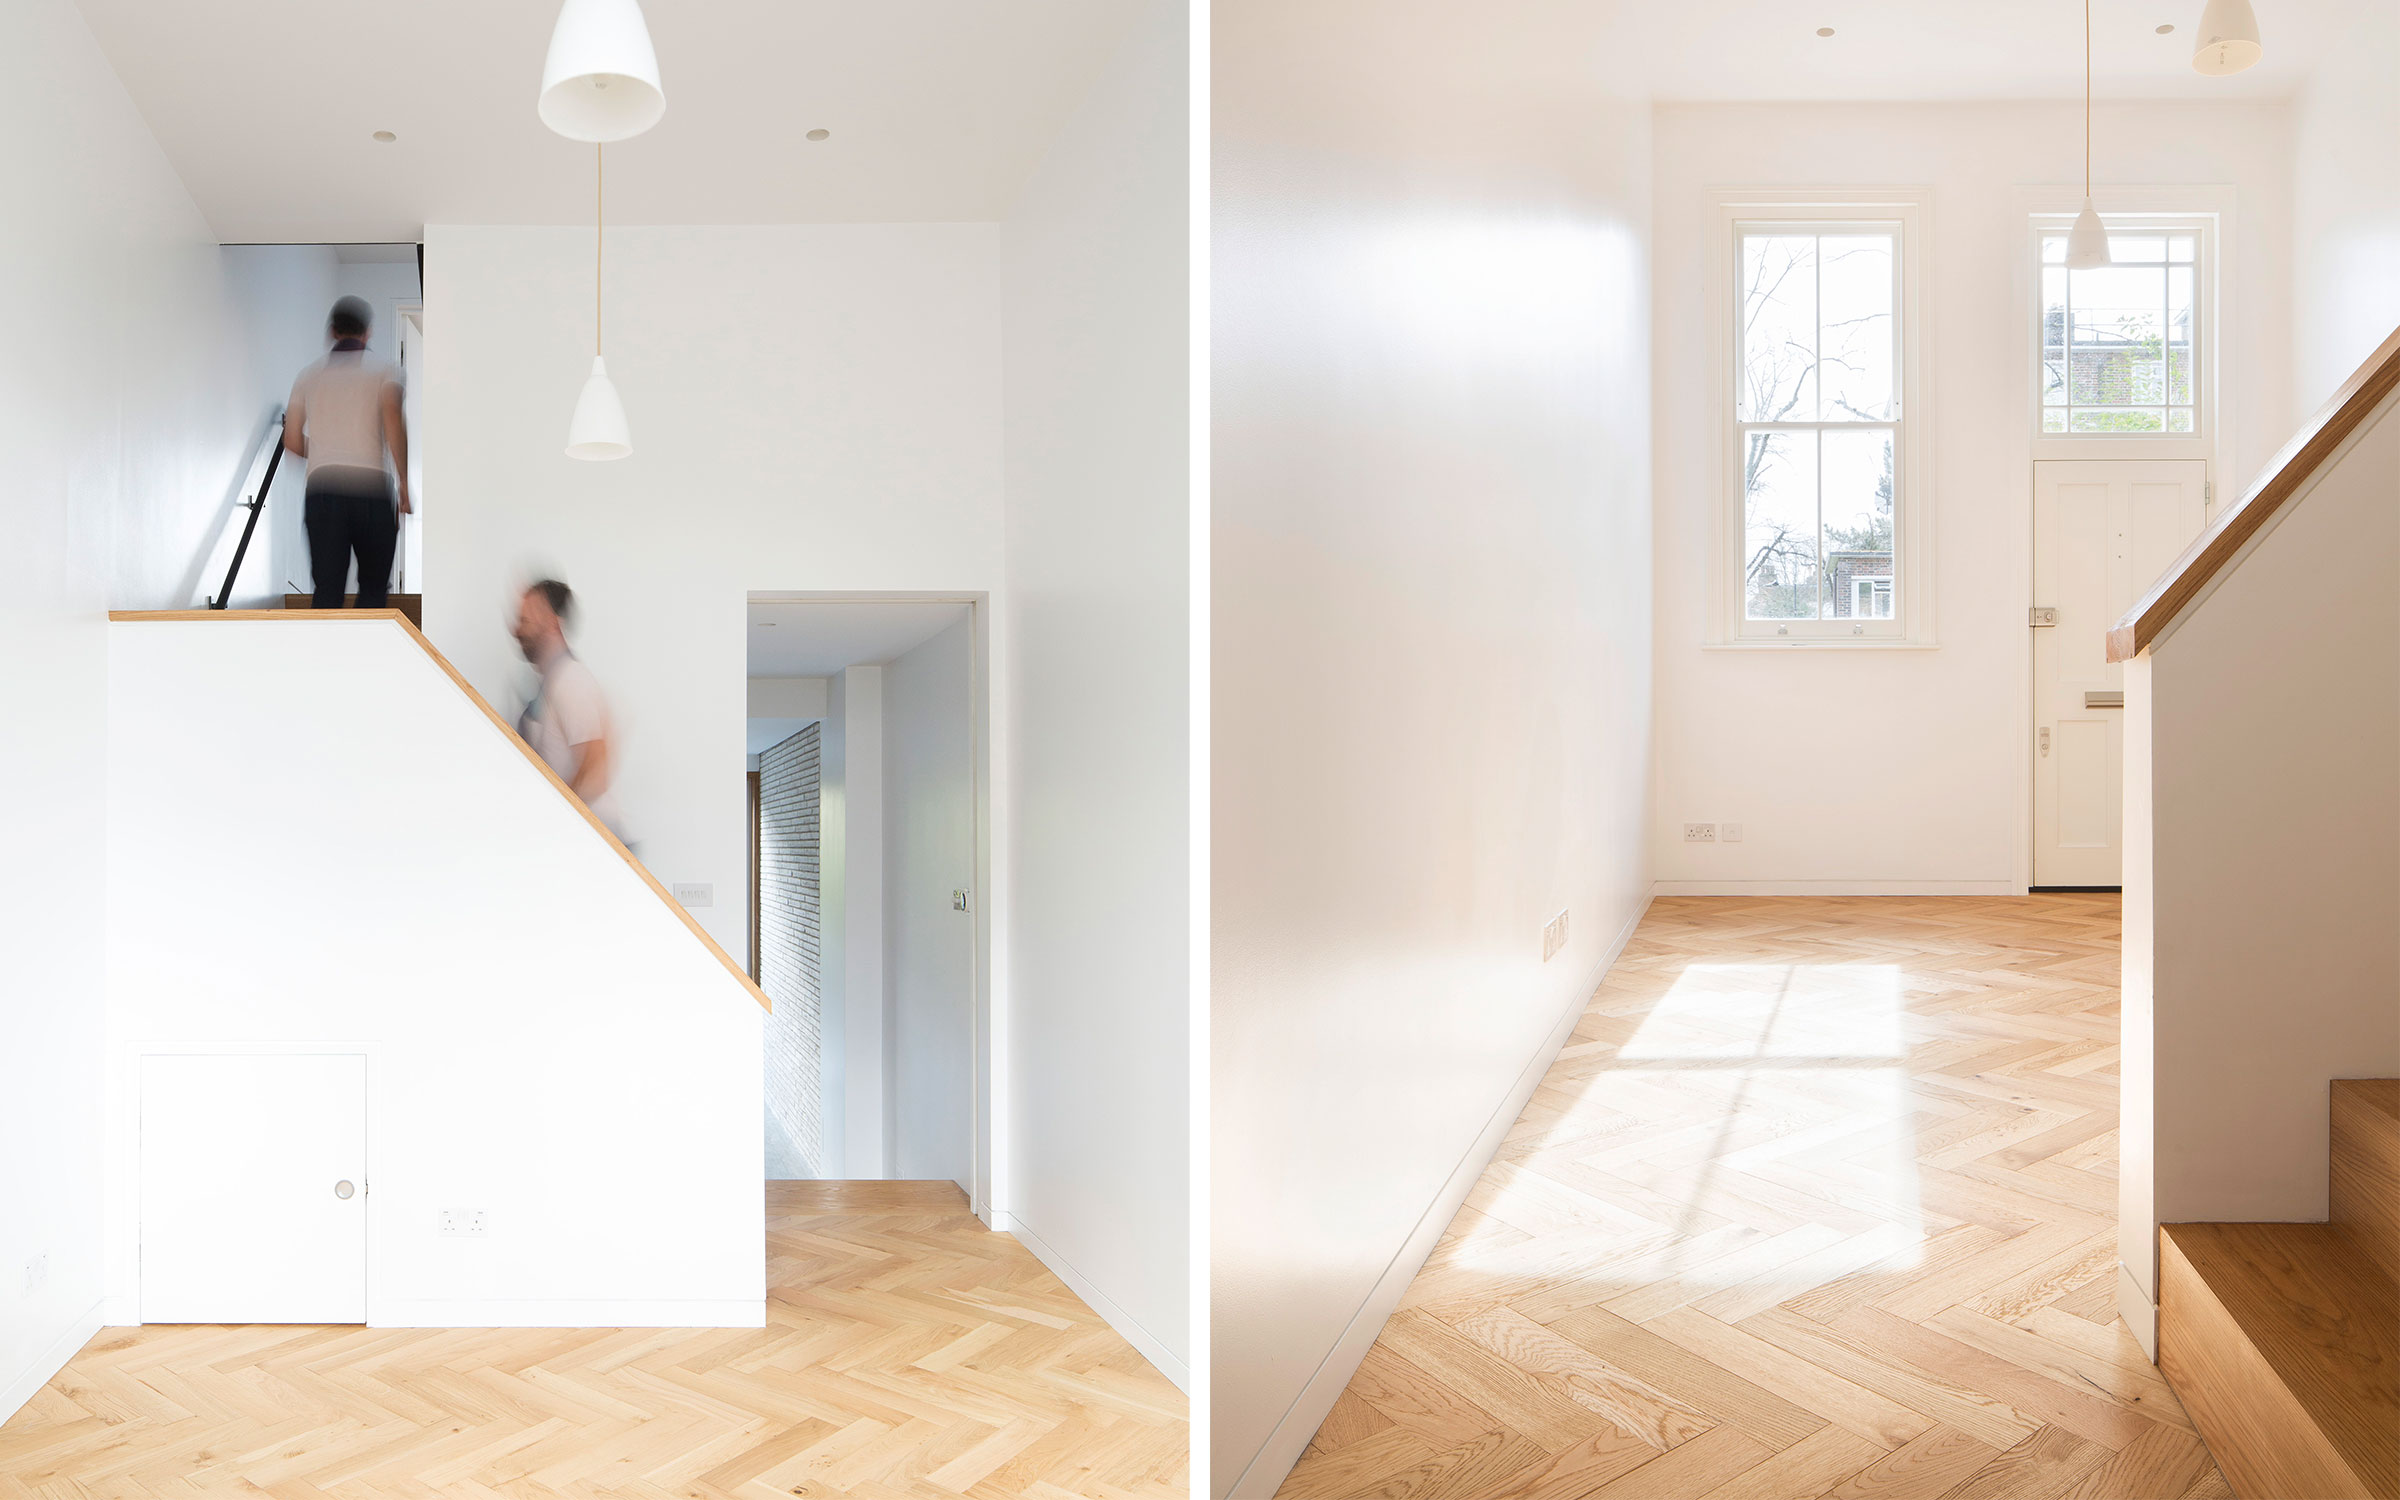 Almond Herringbone, Project Collection, J Foster Architects, The Narrow House -  C/O Agnese Sanvito.